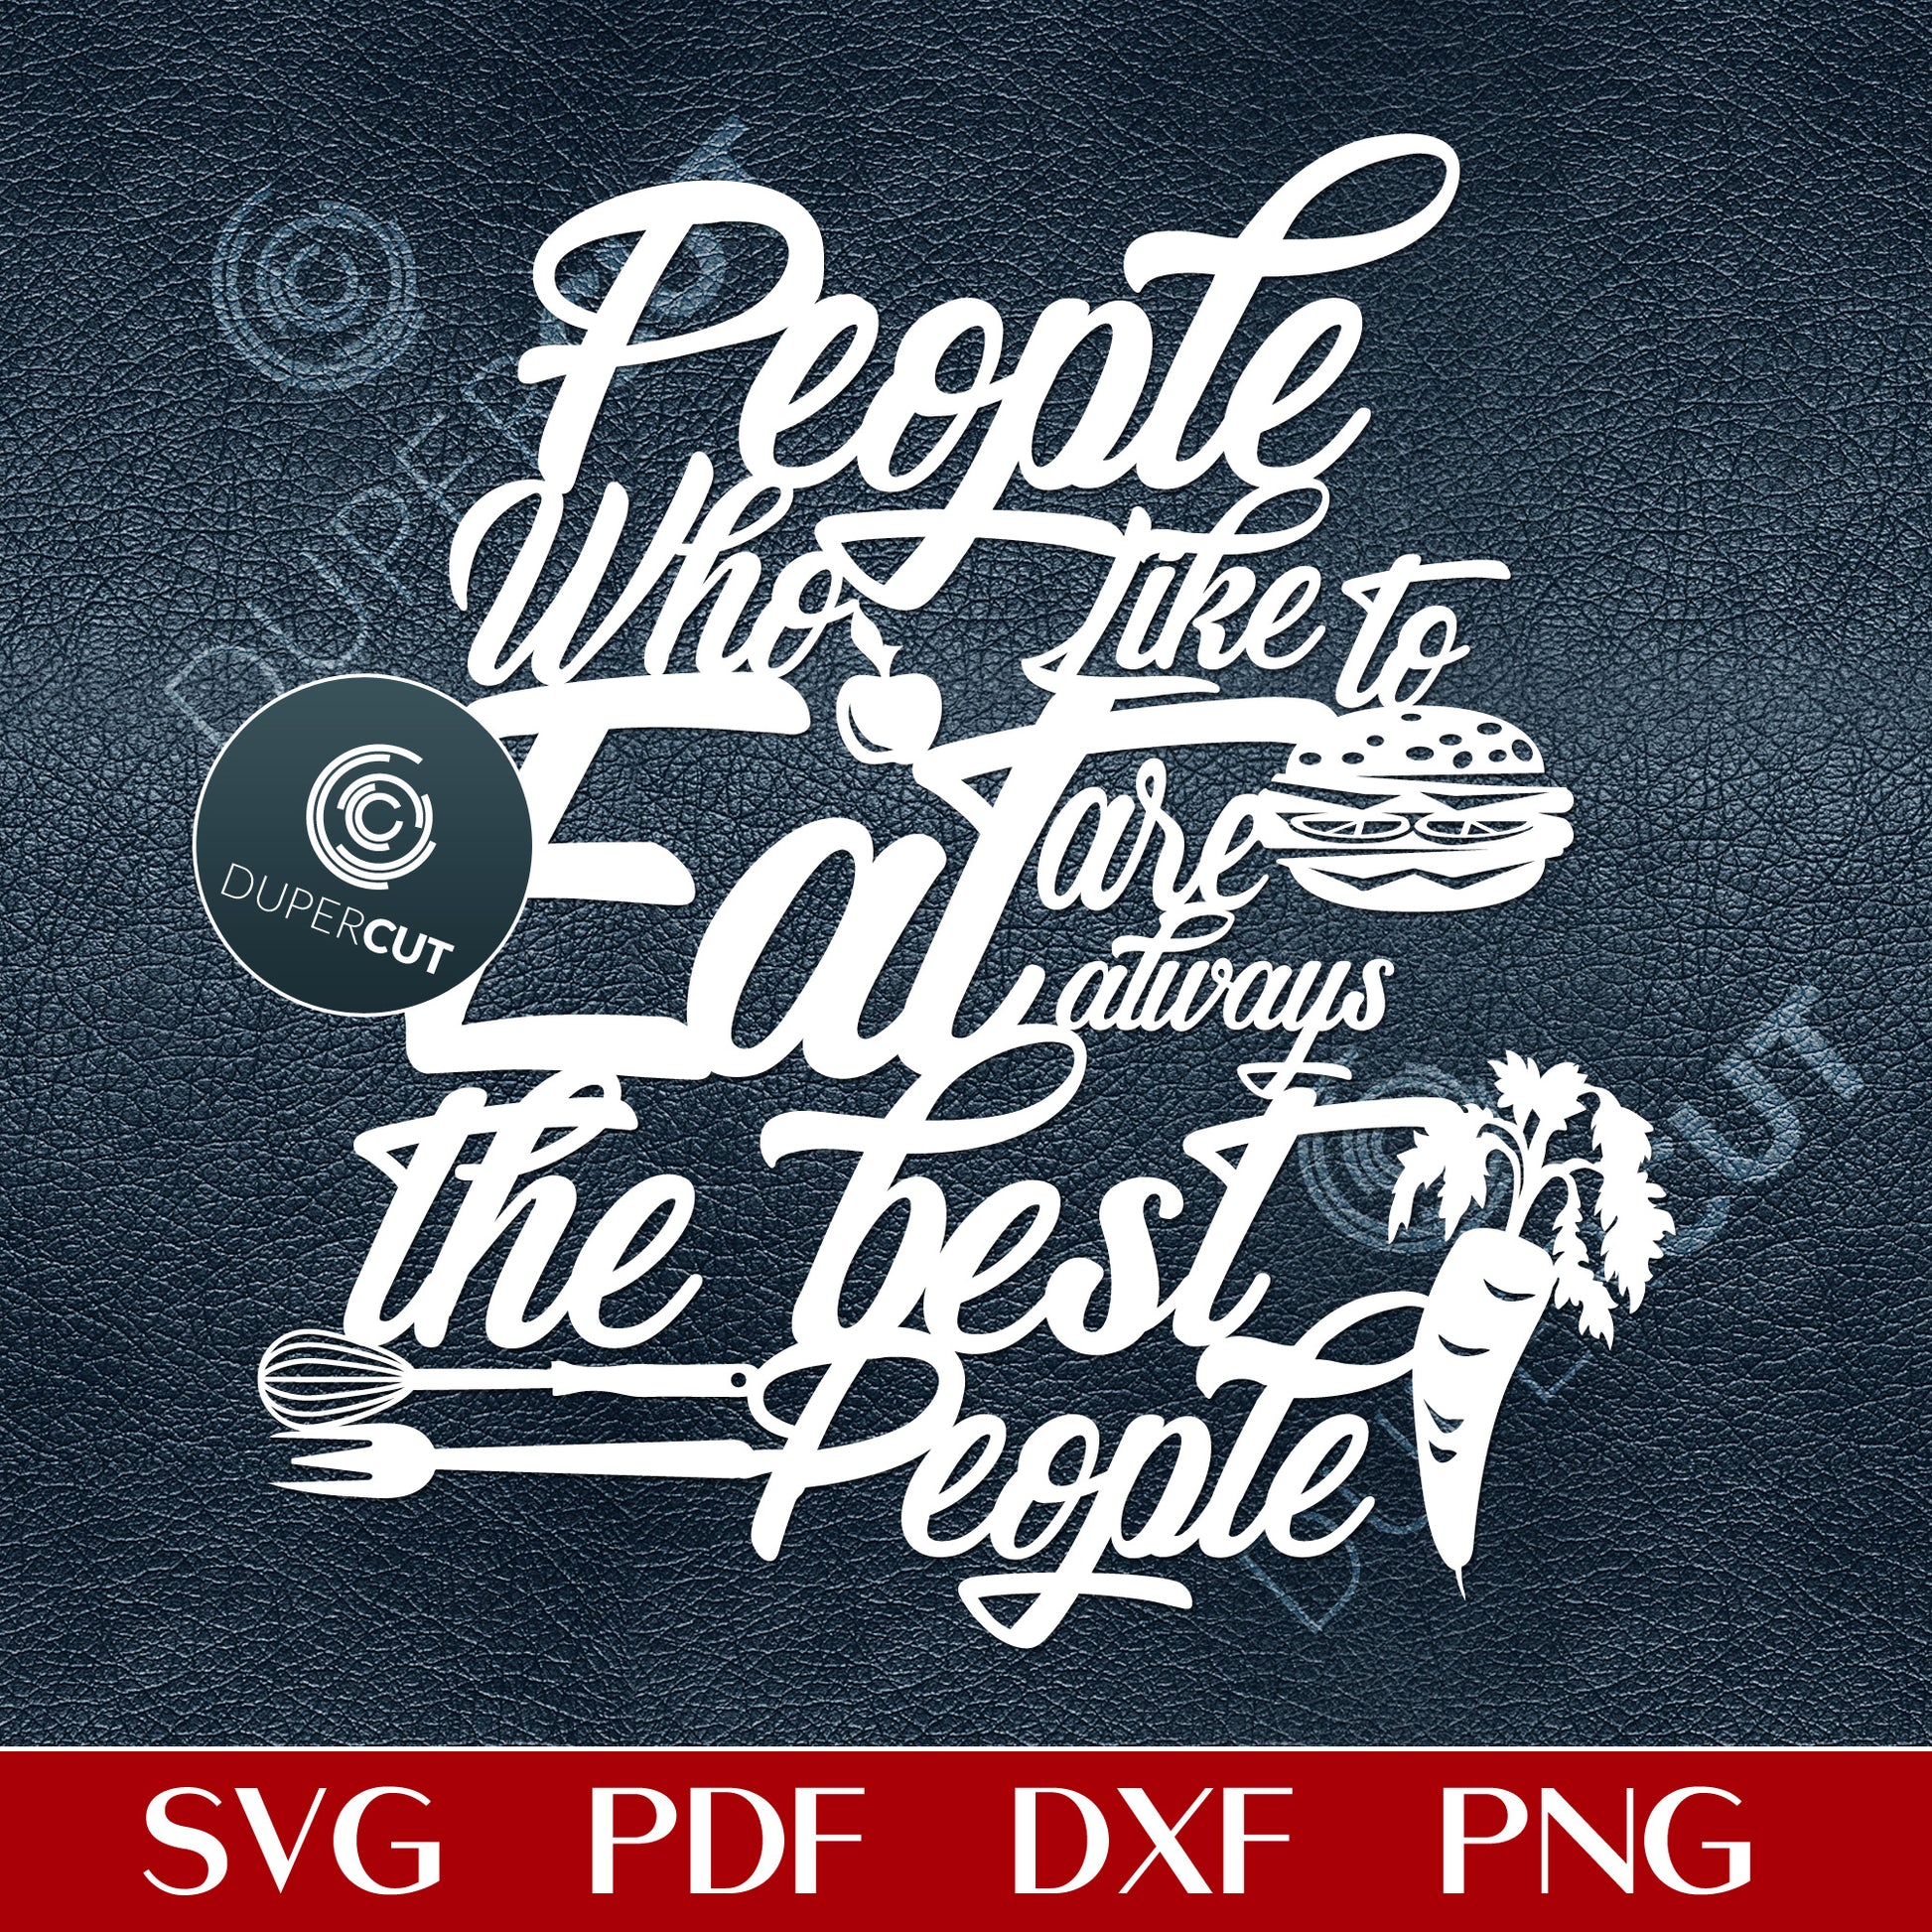 Funny Kitchen quotes - SVG PDF DXF vector files for cutting, engraving, Cricut, Glowforge, Silhouette Cameo